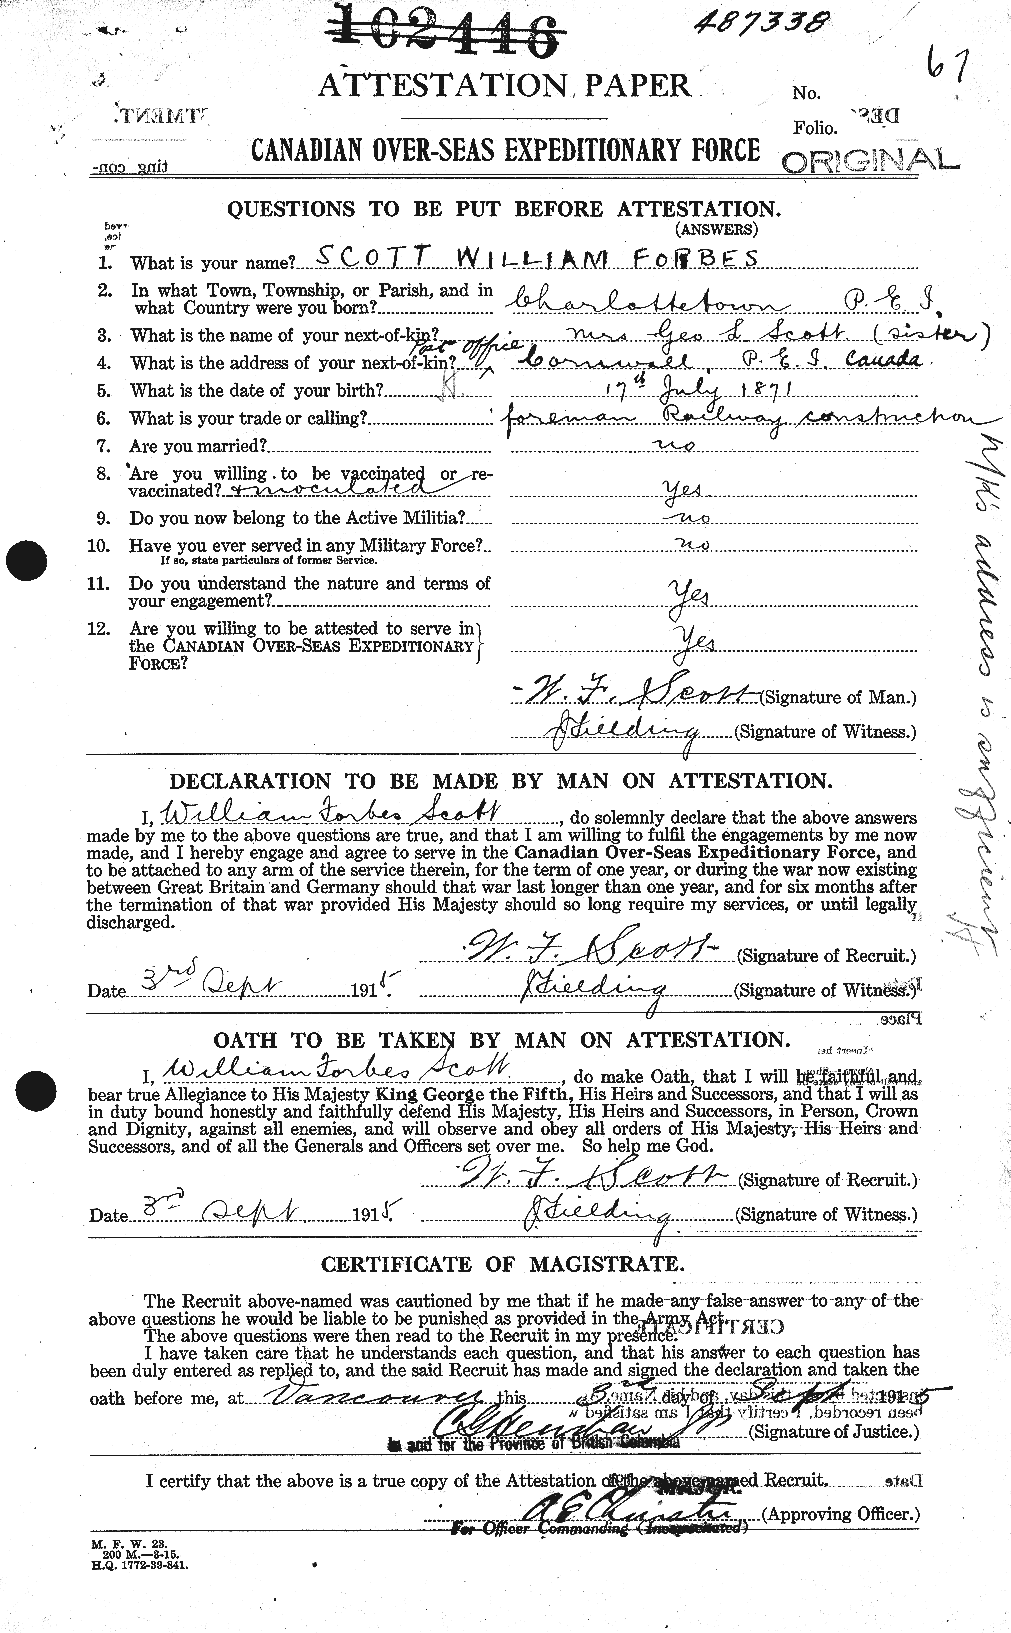 Personnel Records of the First World War - CEF 087022a